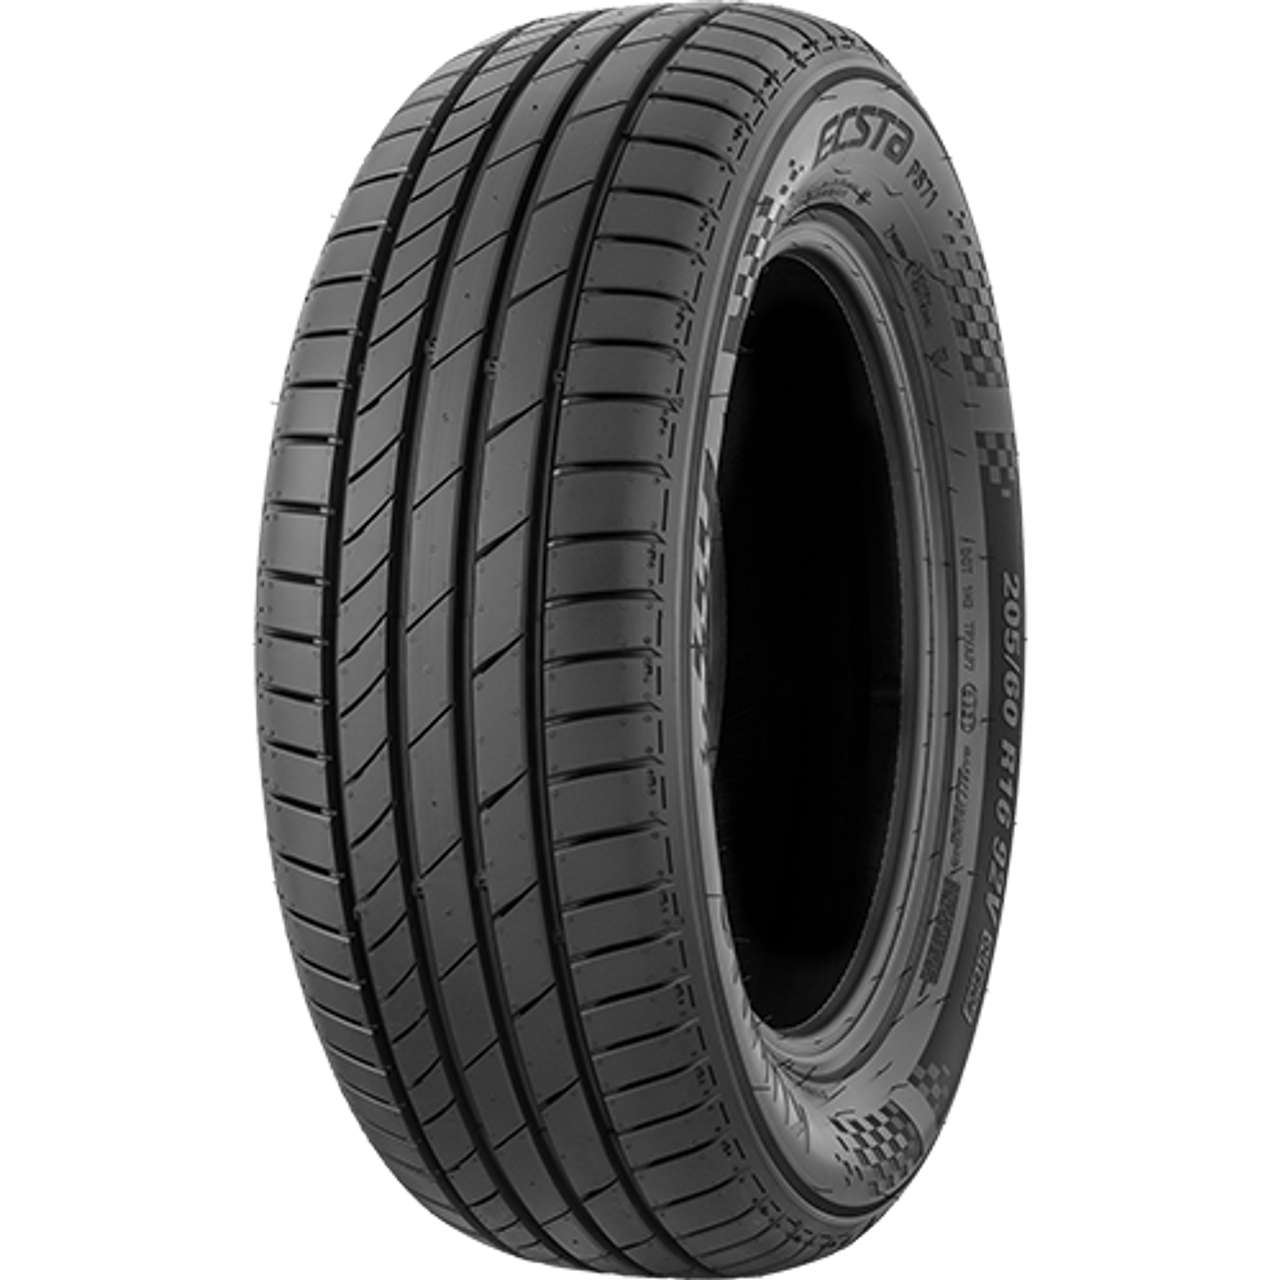 KUMHO ECSTA PS71 235/40ZR20 96Y BSW